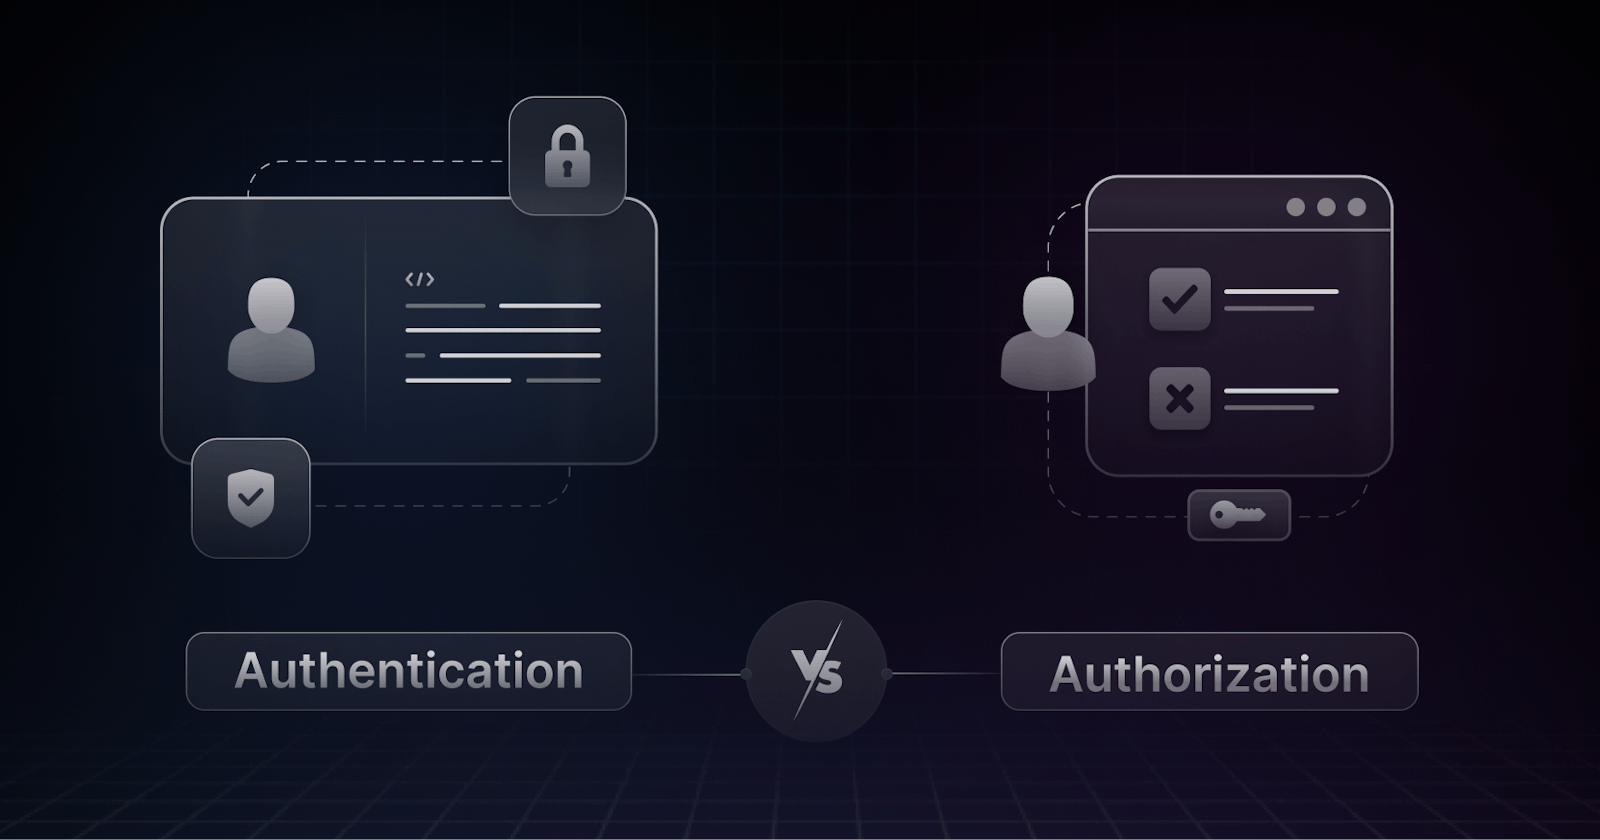 Authentication vs Authorization: What's the difference?